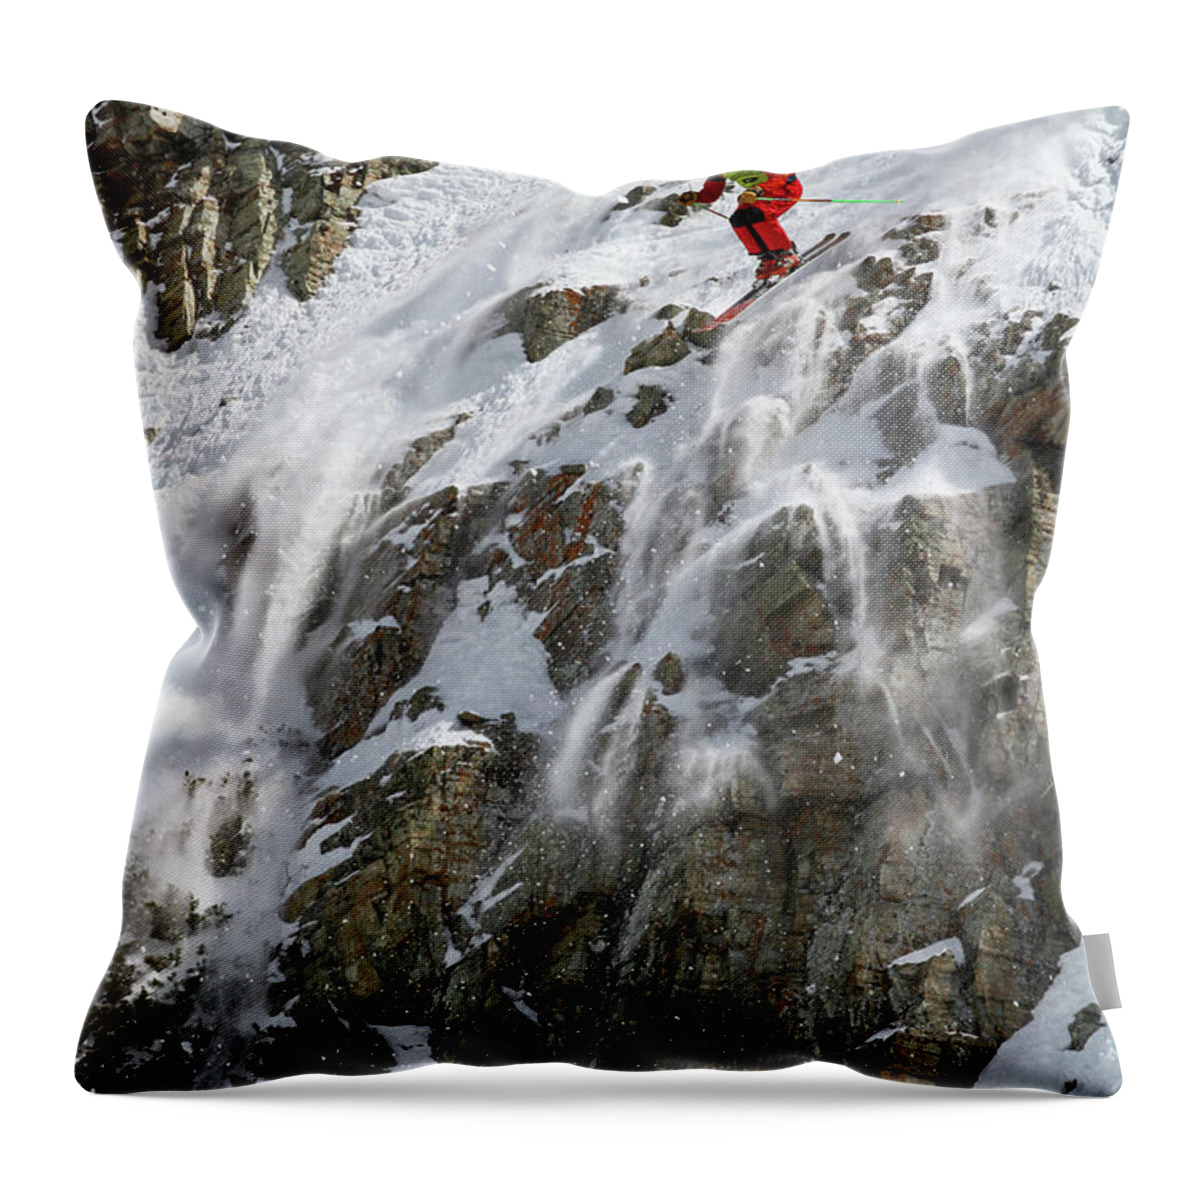 Utah Throw Pillow featuring the photograph Extreme Skiing Competition Skier - Snowbird, Utah by Brett Pelletier